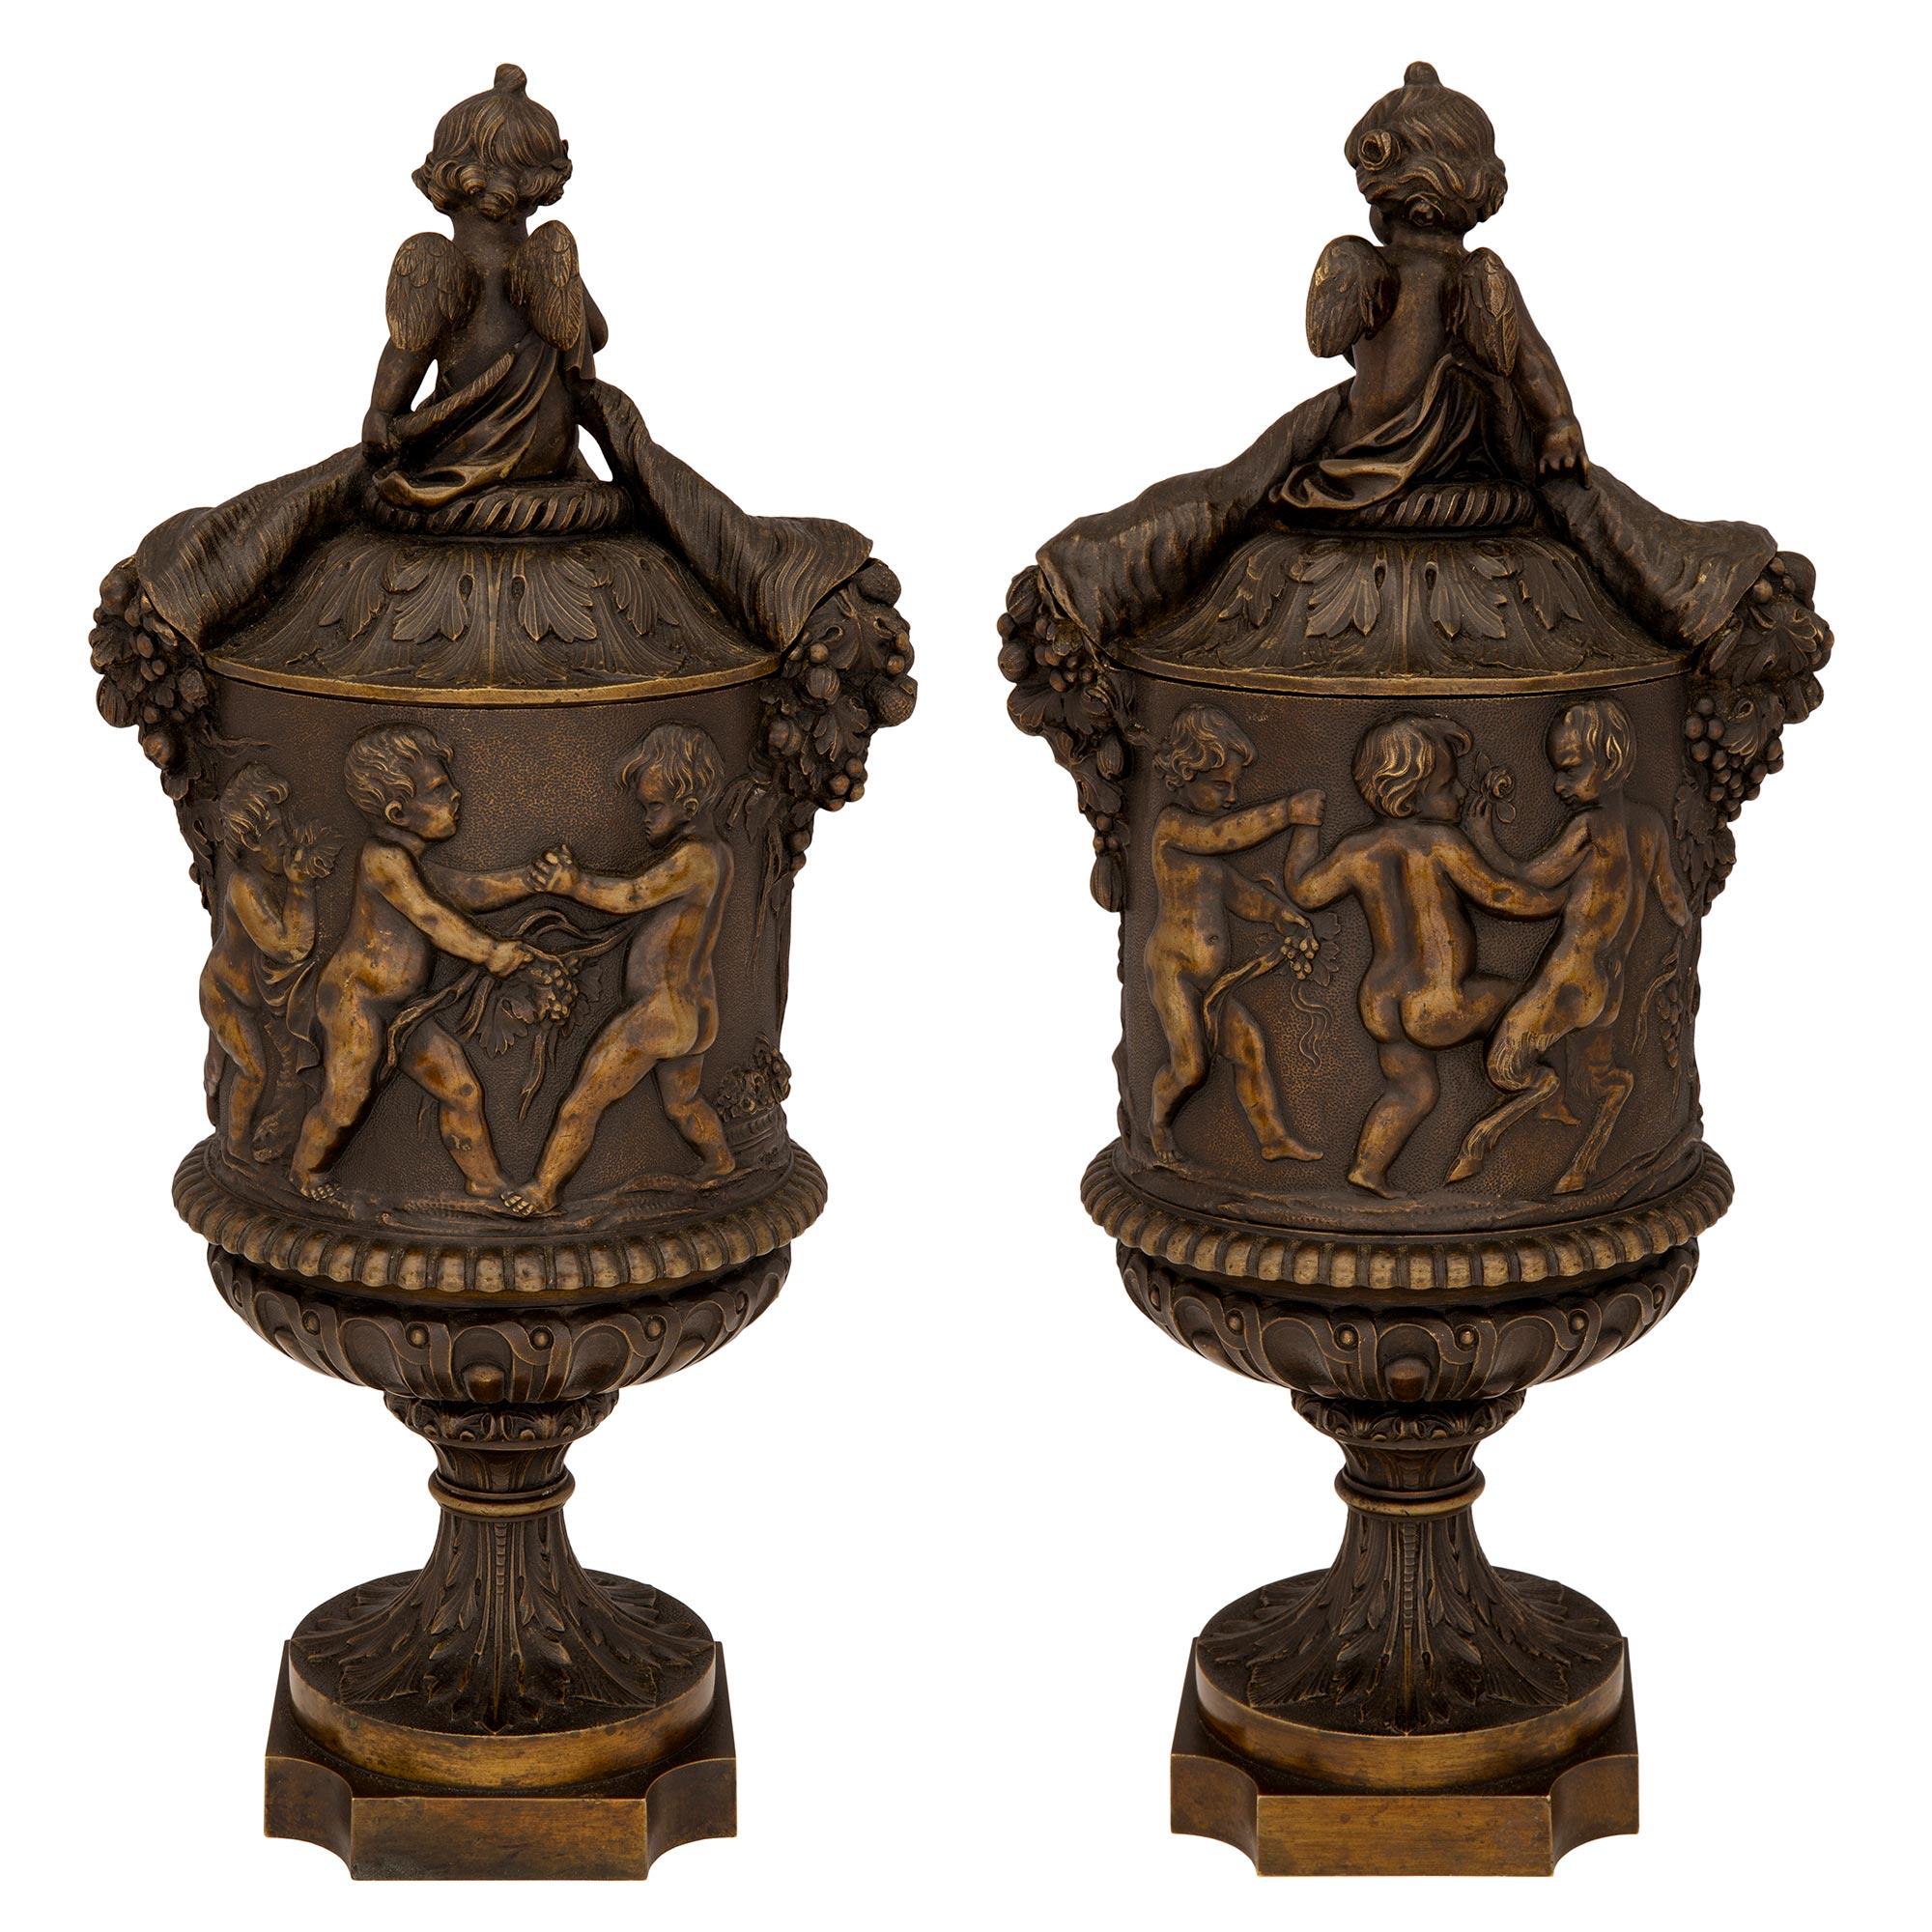 A charming and high quality pair of French 19th century Renaissance st. patinated bronze lidded urns, attributed to Auguste-Maximilien Delafontaine. Each urn is raised by a square base with concave corners and a fine socle pedestal. At the bodies